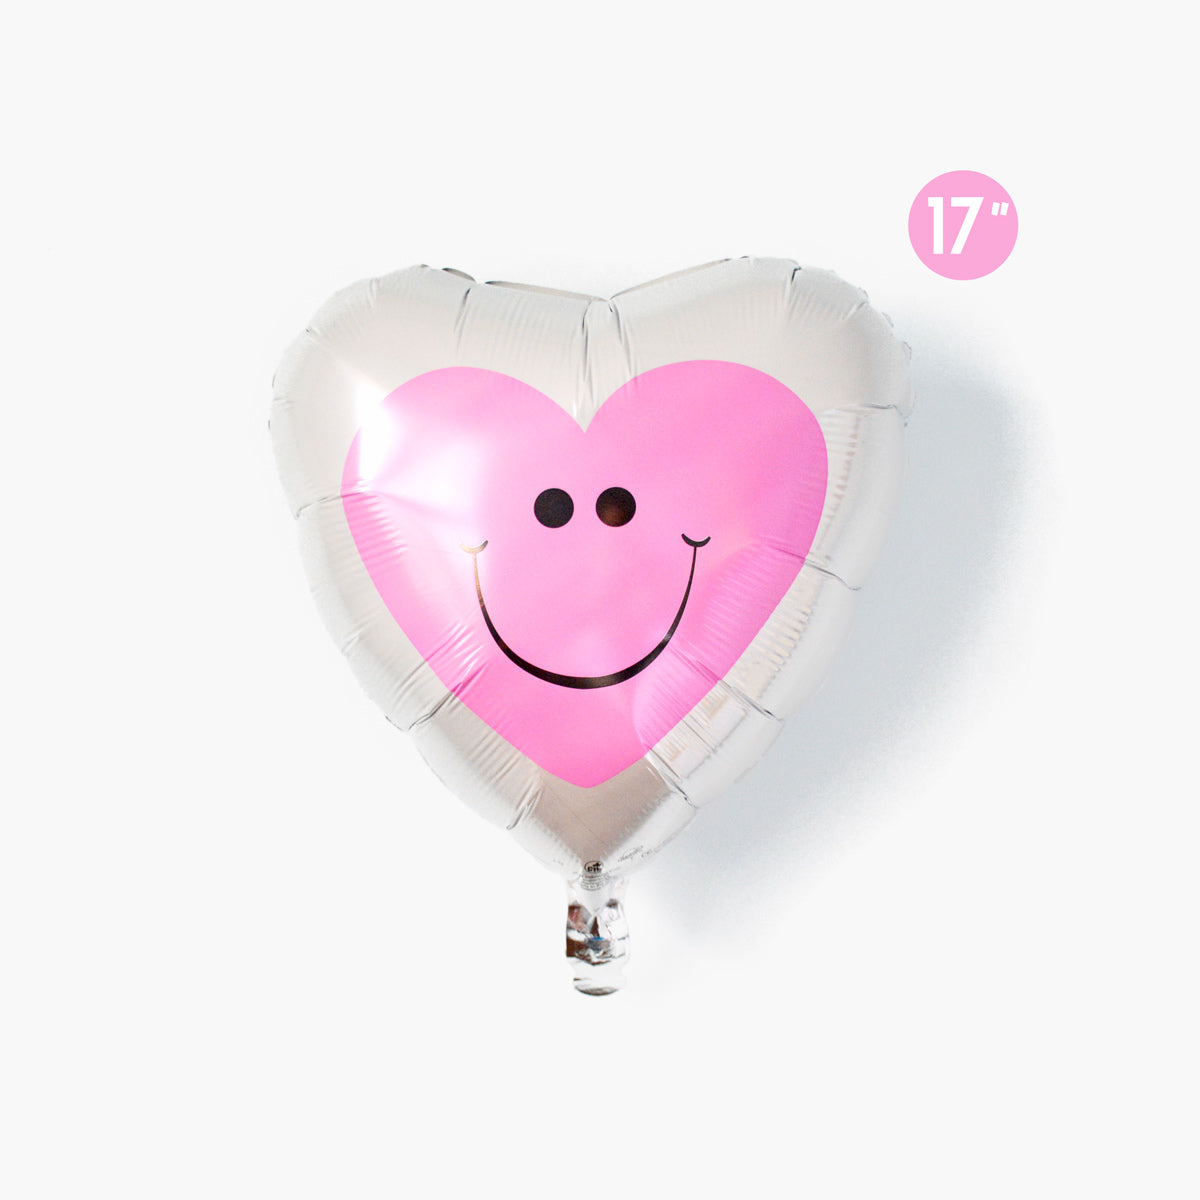 Pink Heart Smiley Face Foil Balloon 17" - Hippie Funky Groovy Birthday Party Decor